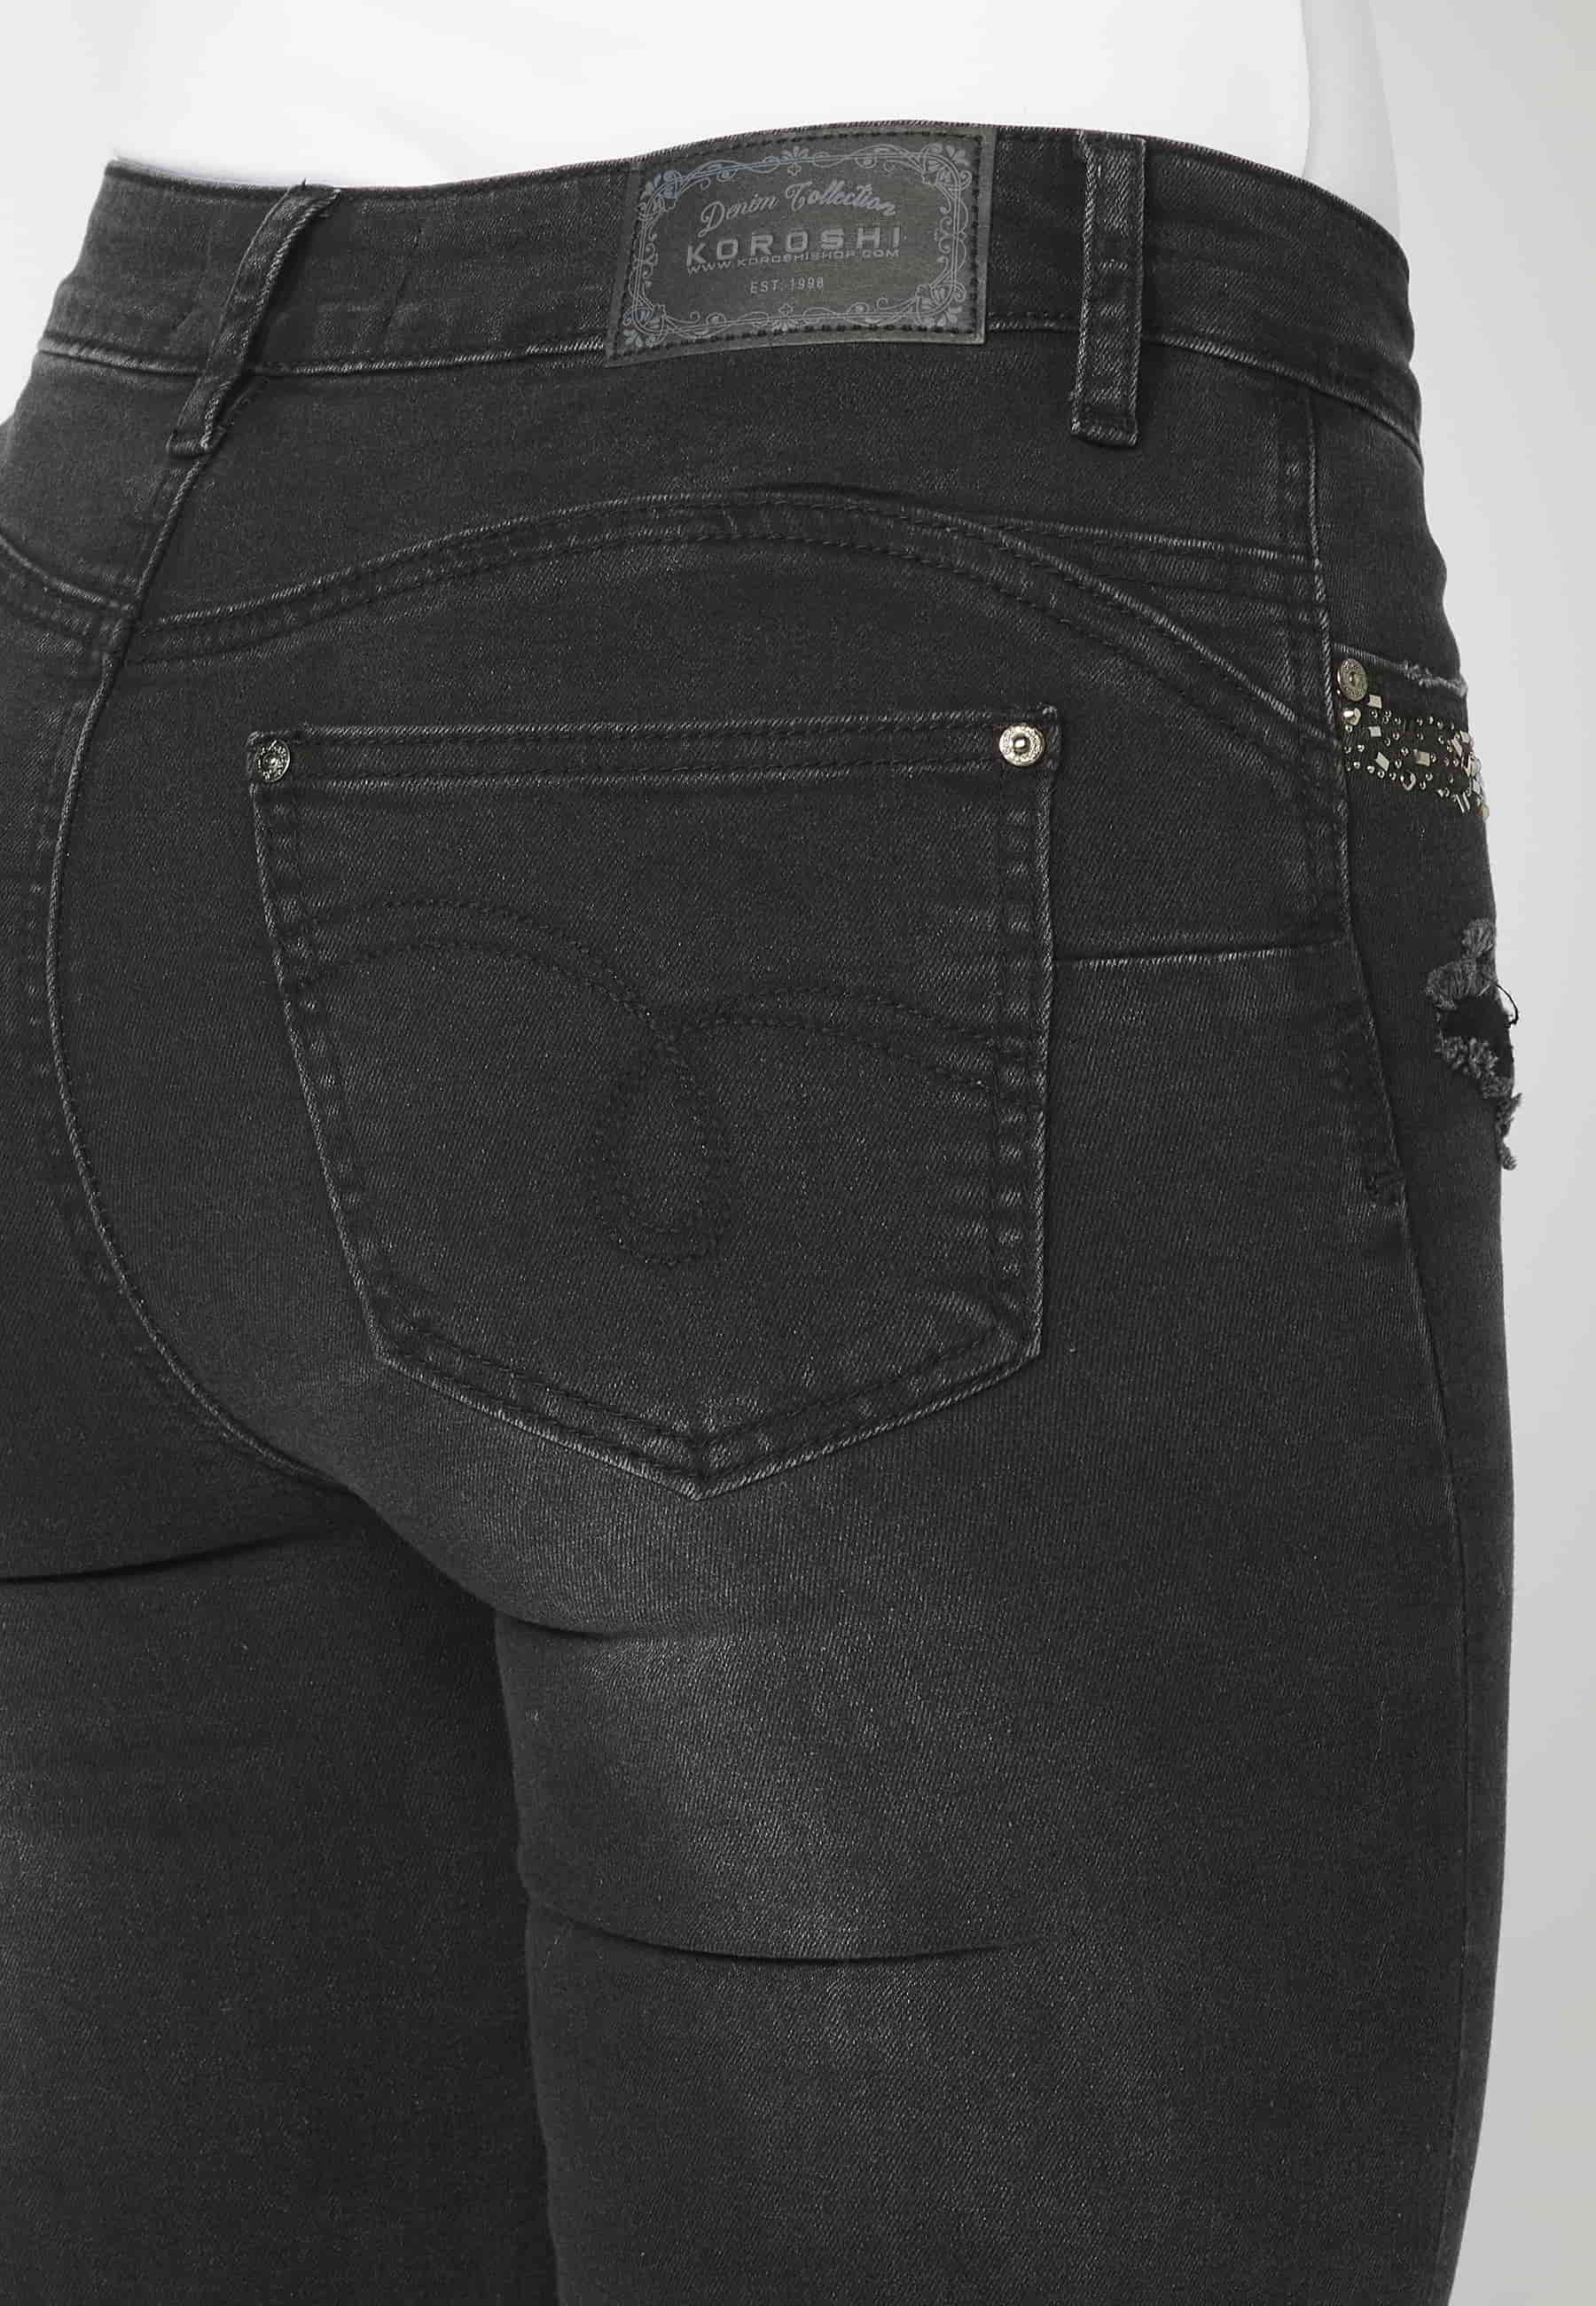 Long denim pants with details in the pockets in Black color for Woman